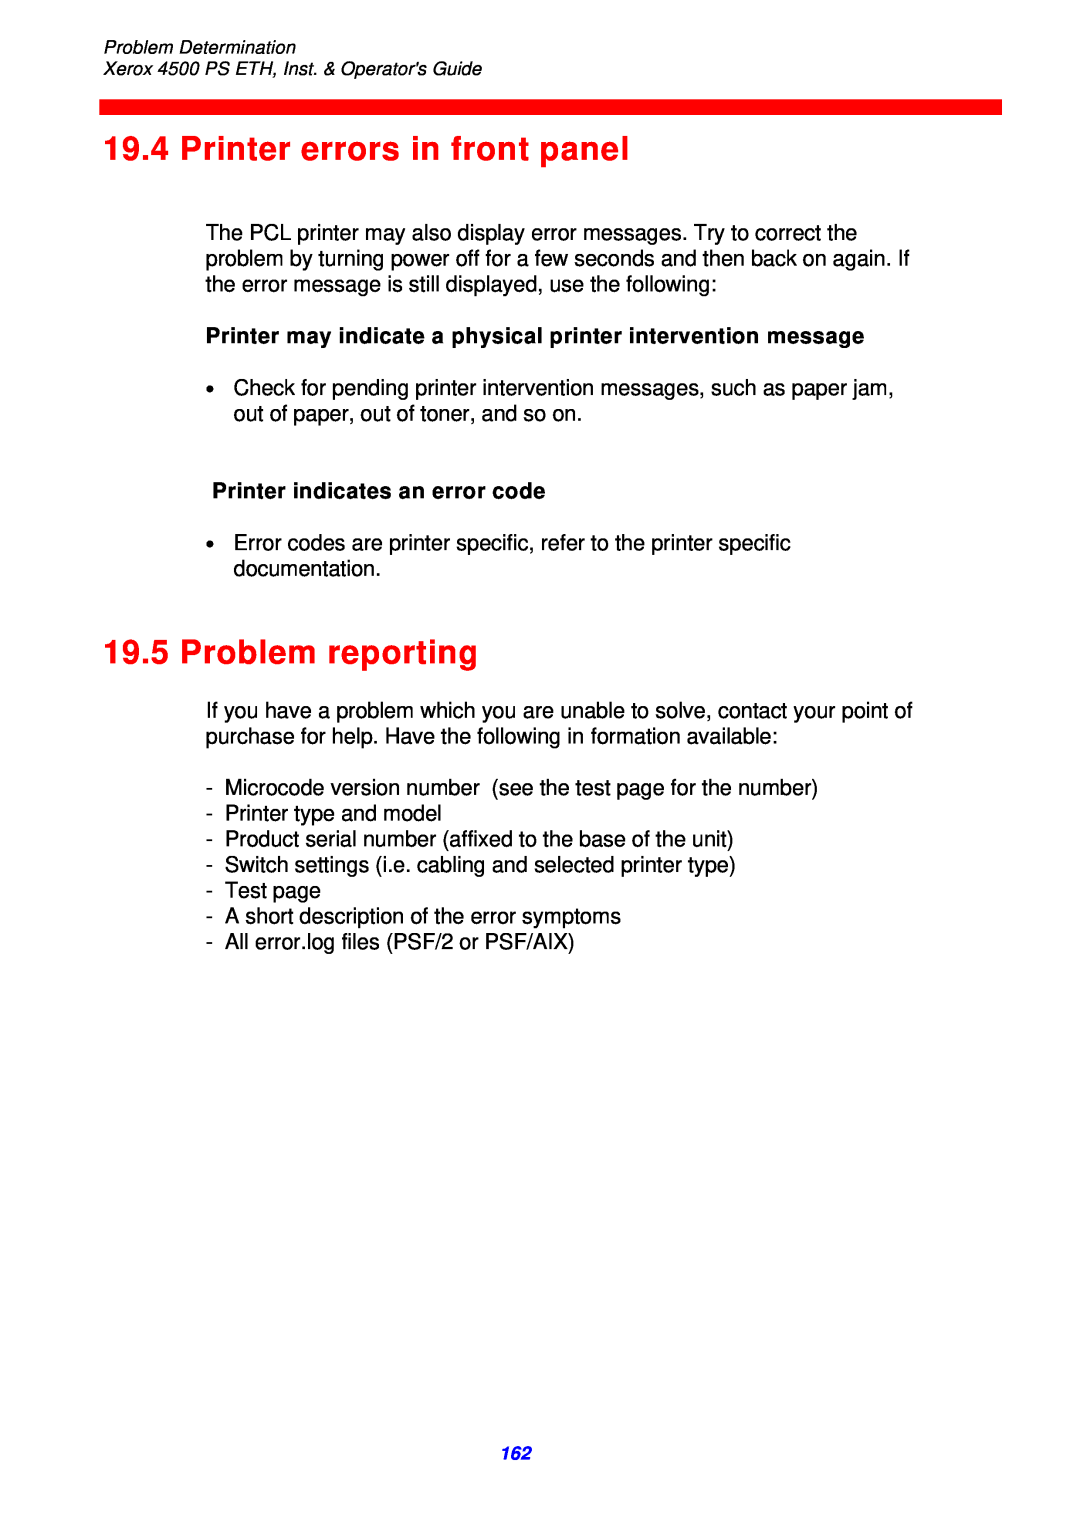 Xerox 4500 ps eth instruction manual Printer errors in front panel, Problem reporting, Printer indicates an error code 